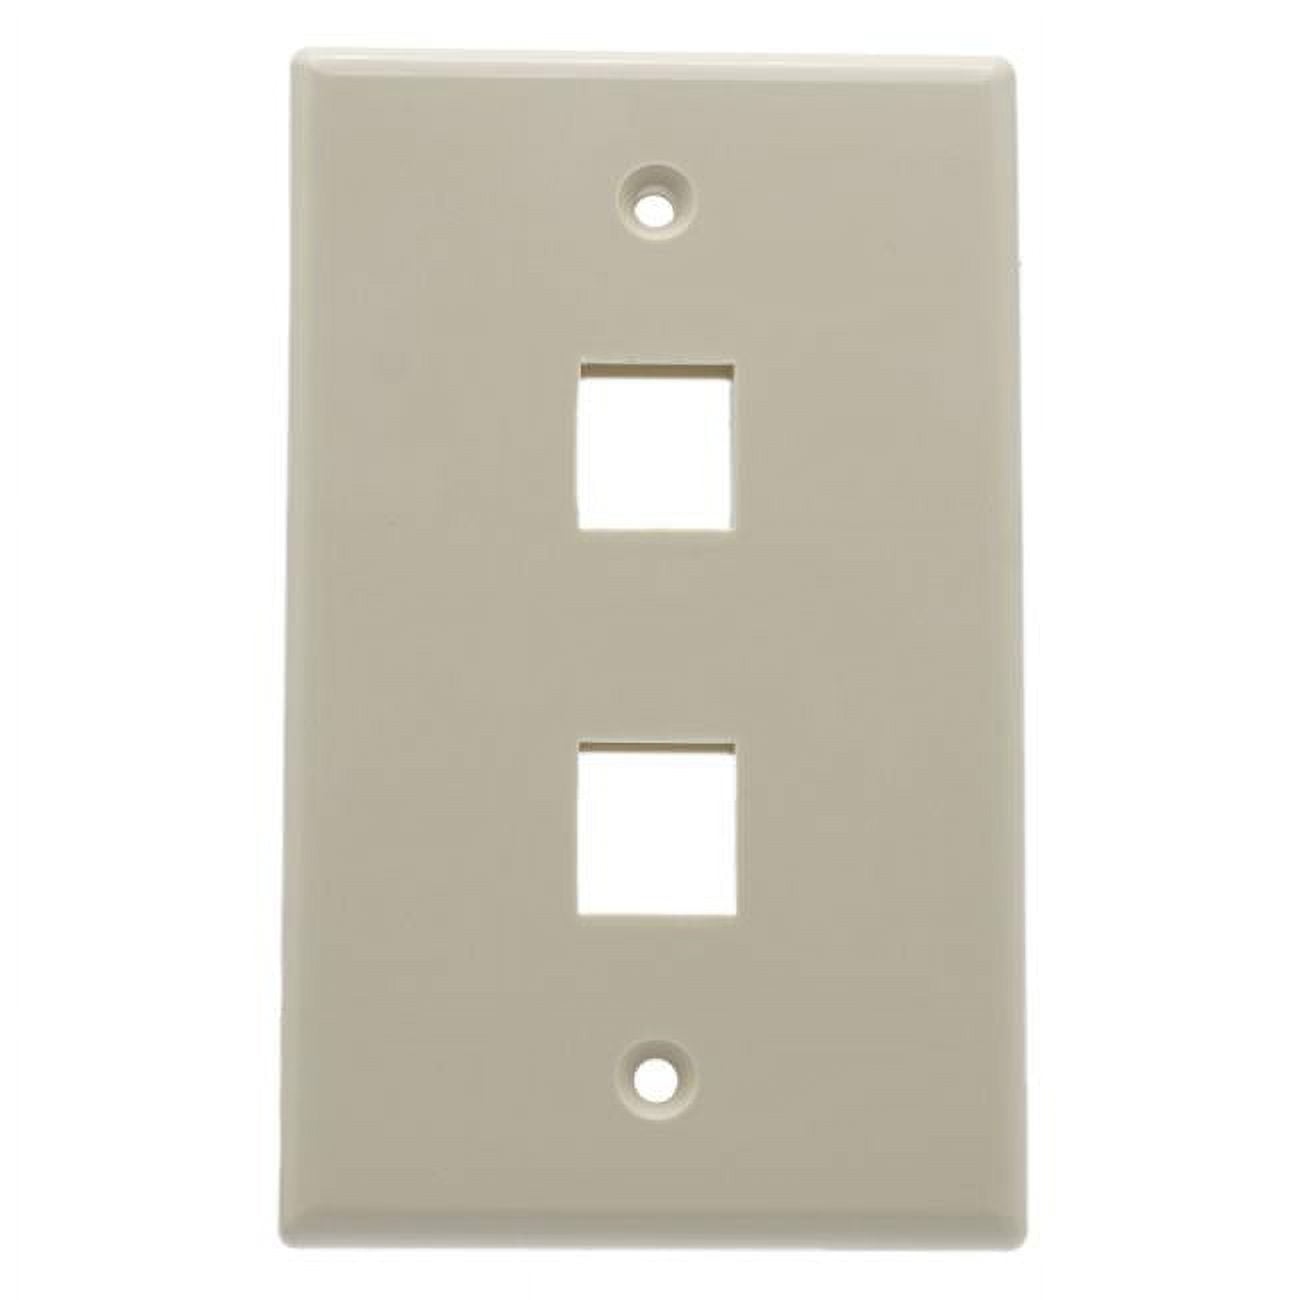 Picture of CableWholesale 3012-09301 Keystone Single Gang 1 Port Wall Plate, Lite Almond